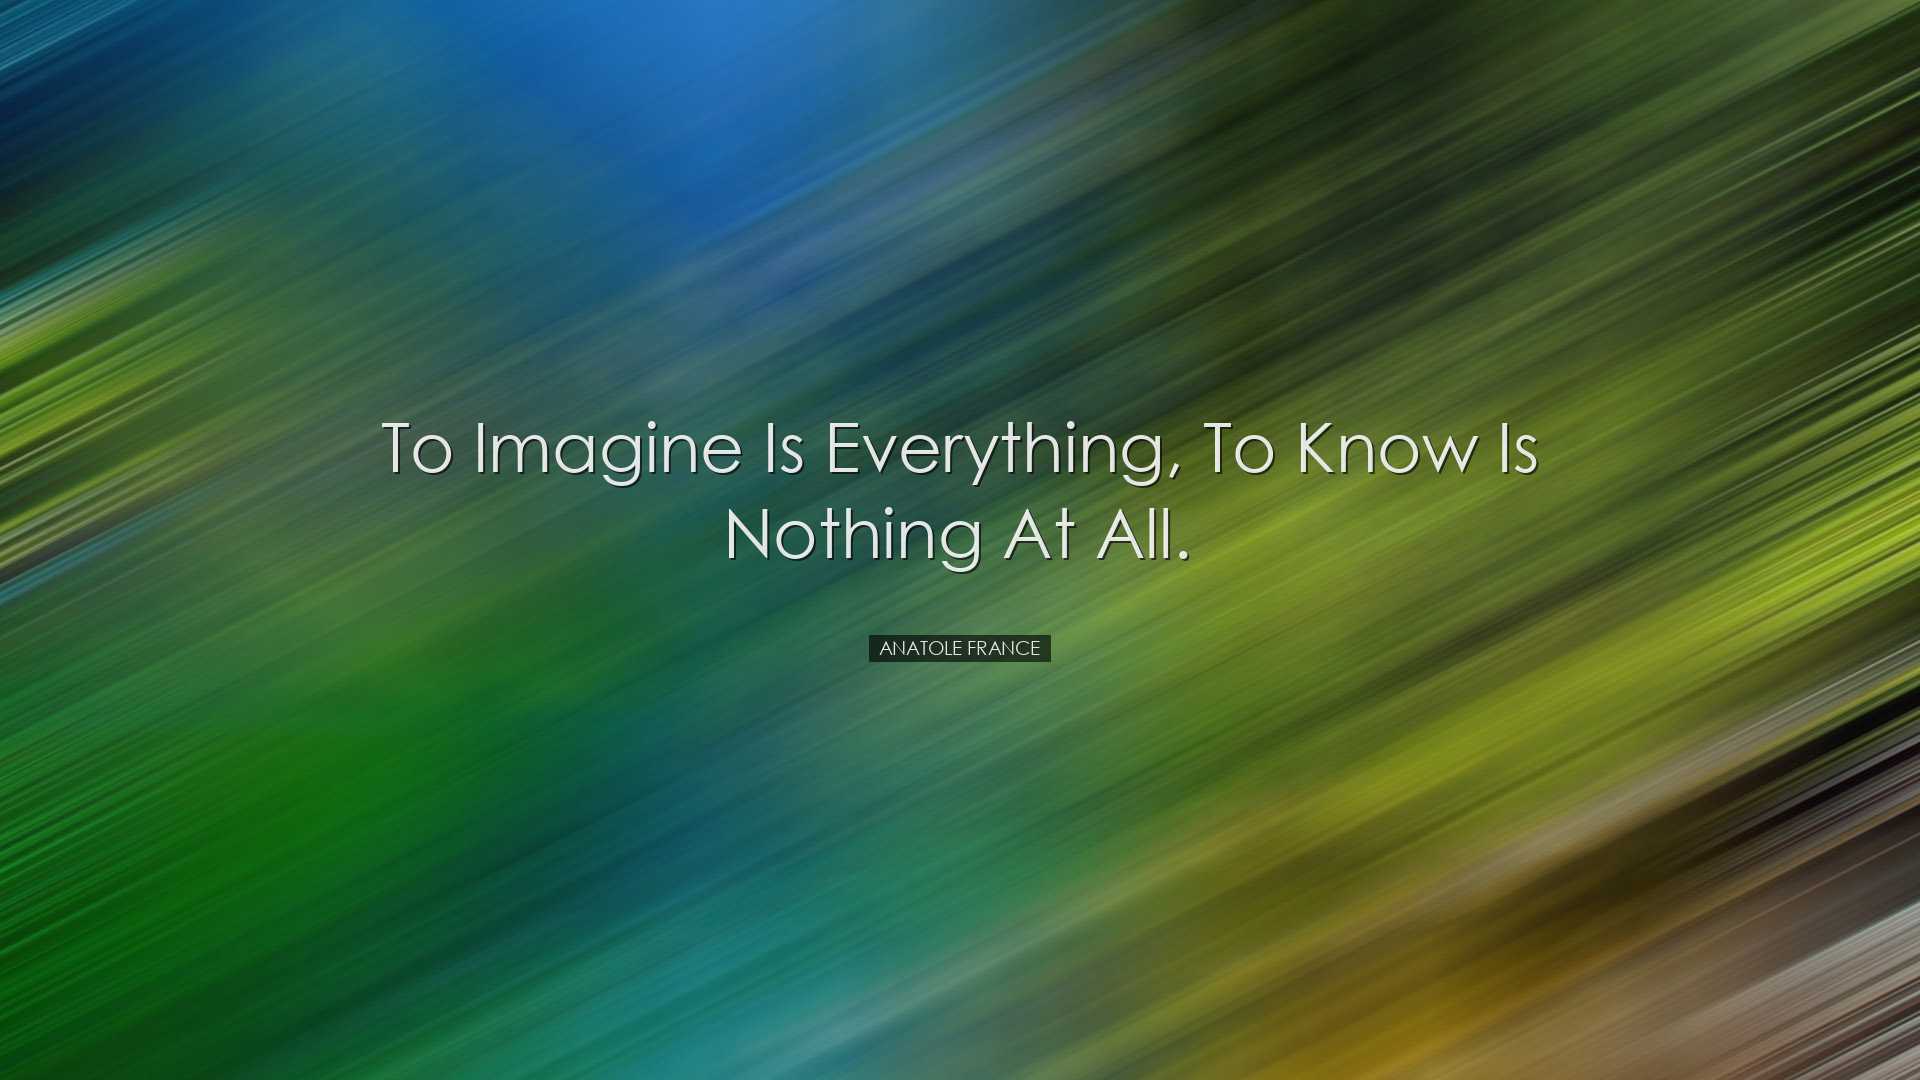 To imagine is everything, to know is nothing at all. - Anatole Fra